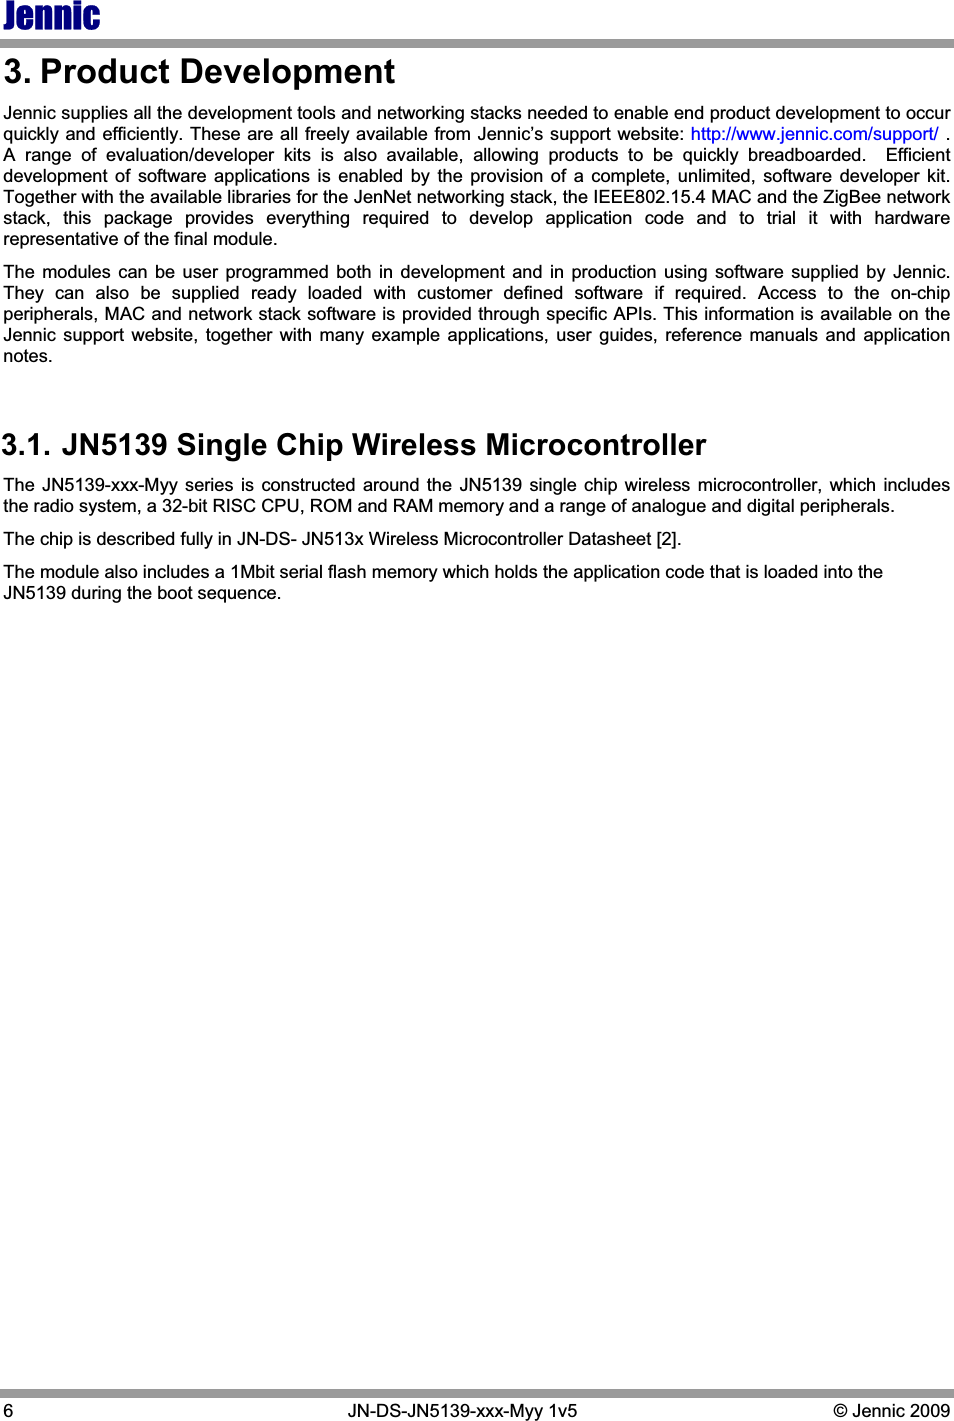 Jennic6   JN-DS-JN5139-xxx-Myy 1v5  © Jennic 2009 3. Product Development Jennic supplies all the development tools and networking stacks needed to enable end product development to occur quickly and efficiently. These are all freely available from Jennic’s support website: http://www.jennic.com/support/ .  A range of evaluation/developer kits is also available, allowing products to be quickly breadboarded.  Efficient development of software applications is enabled by the provision of a complete, unlimited, software developer kit.  Together with the available libraries for the JenNet networking stack, the IEEE802.15.4 MAC and the ZigBee network stack, this package provides everything required to develop application code and to trial it with hardware representative of the final module. The modules can be user programmed both in development and in production using software supplied by Jennic.  They can also be supplied ready loaded with customer defined software if required. Access to the on-chip peripherals, MAC and network stack software is provided through specific APIs. This information is available on the Jennic support website, together with many example applications, user guides, reference manuals and application notes. 3.1. JN5139 Single Chip Wireless Microcontroller The JN5139-xxx-Myy series is constructed around the JN5139 single chip wireless microcontroller, which includes the radio system, a 32-bit RISC CPU, ROM and RAM memory and a range of analogue and digital peripherals. The chip is described fully in JN-DS- JN513x Wireless Microcontroller Datasheet [2]. The module also includes a 1Mbit serial flash memory which holds the application code that is loaded into the JN5139 during the boot sequence. 